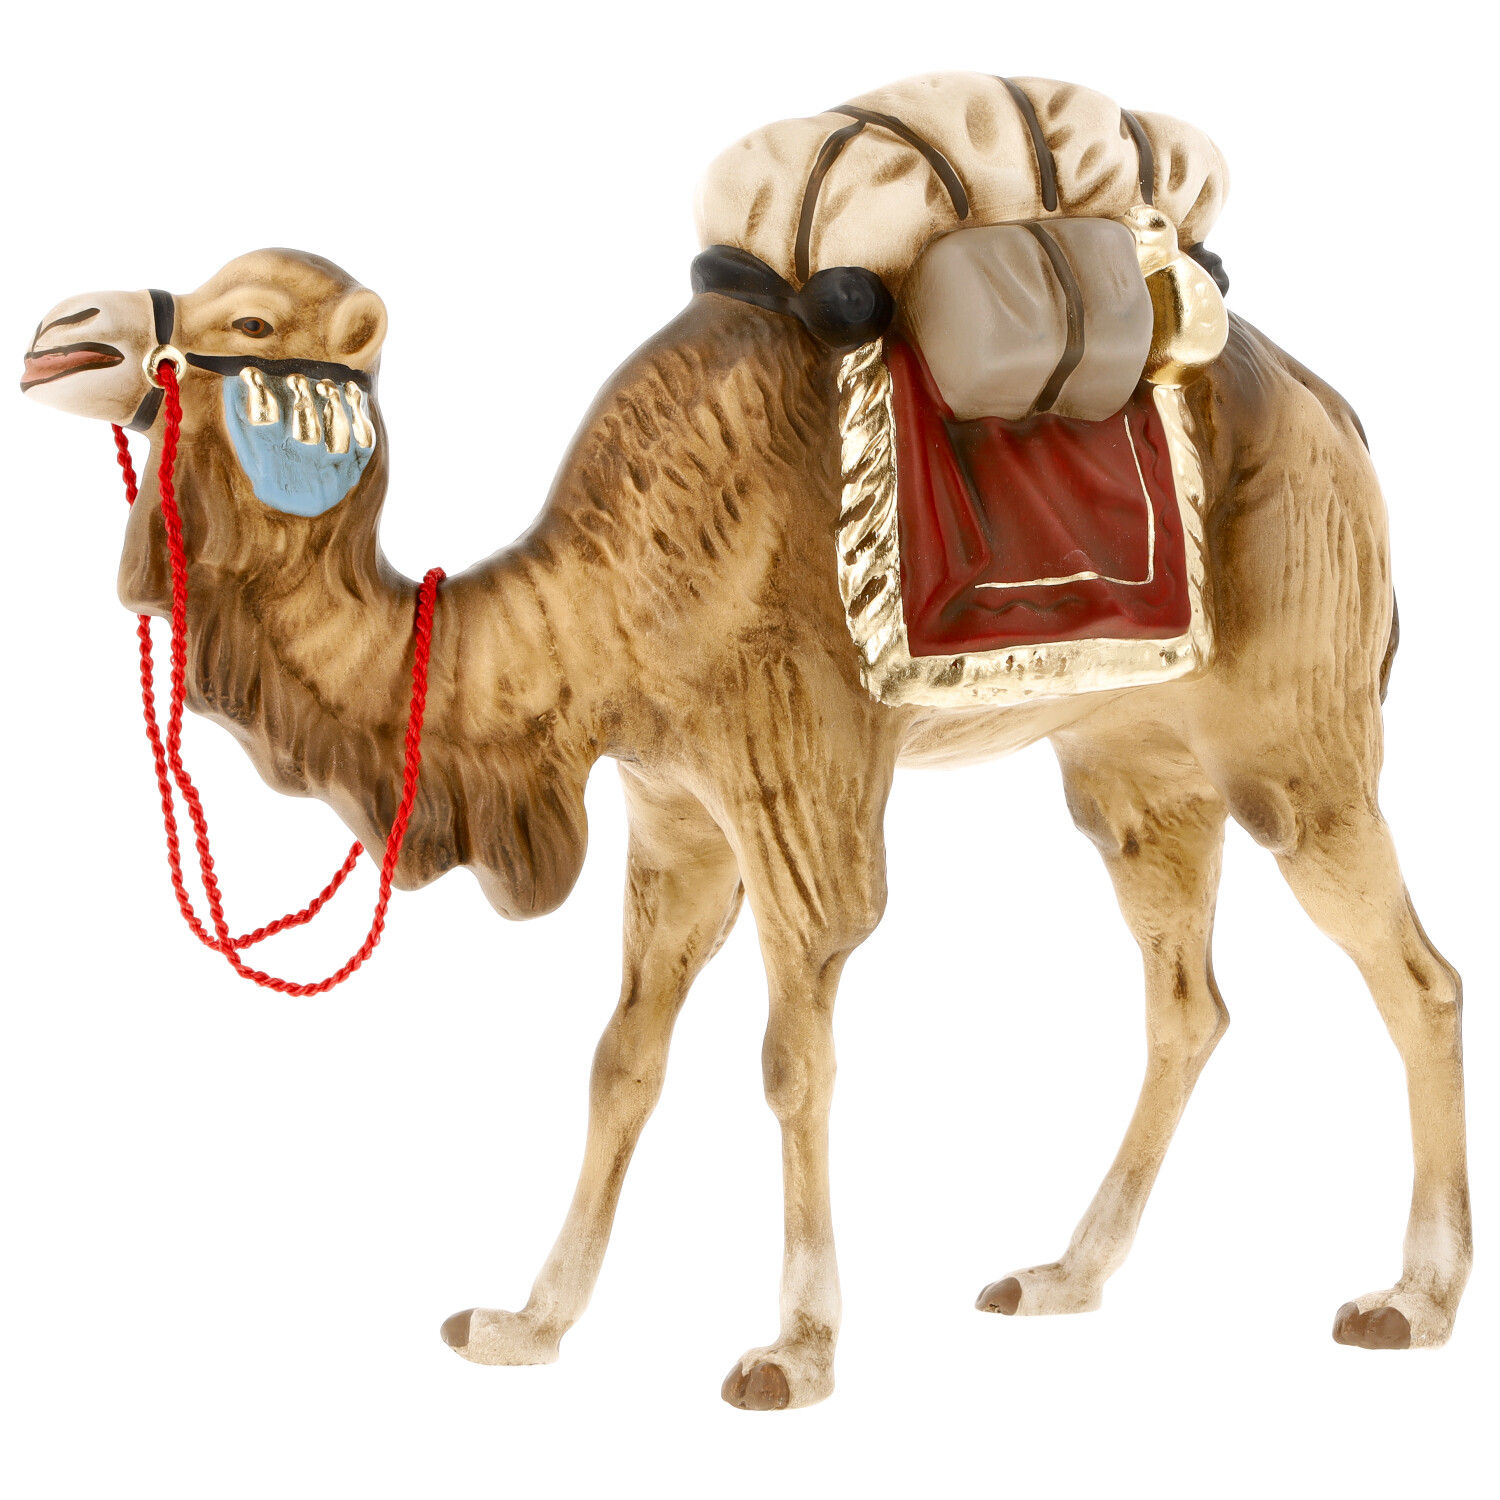 Camel with luggage - Marolin Nativity figure - made in Germany